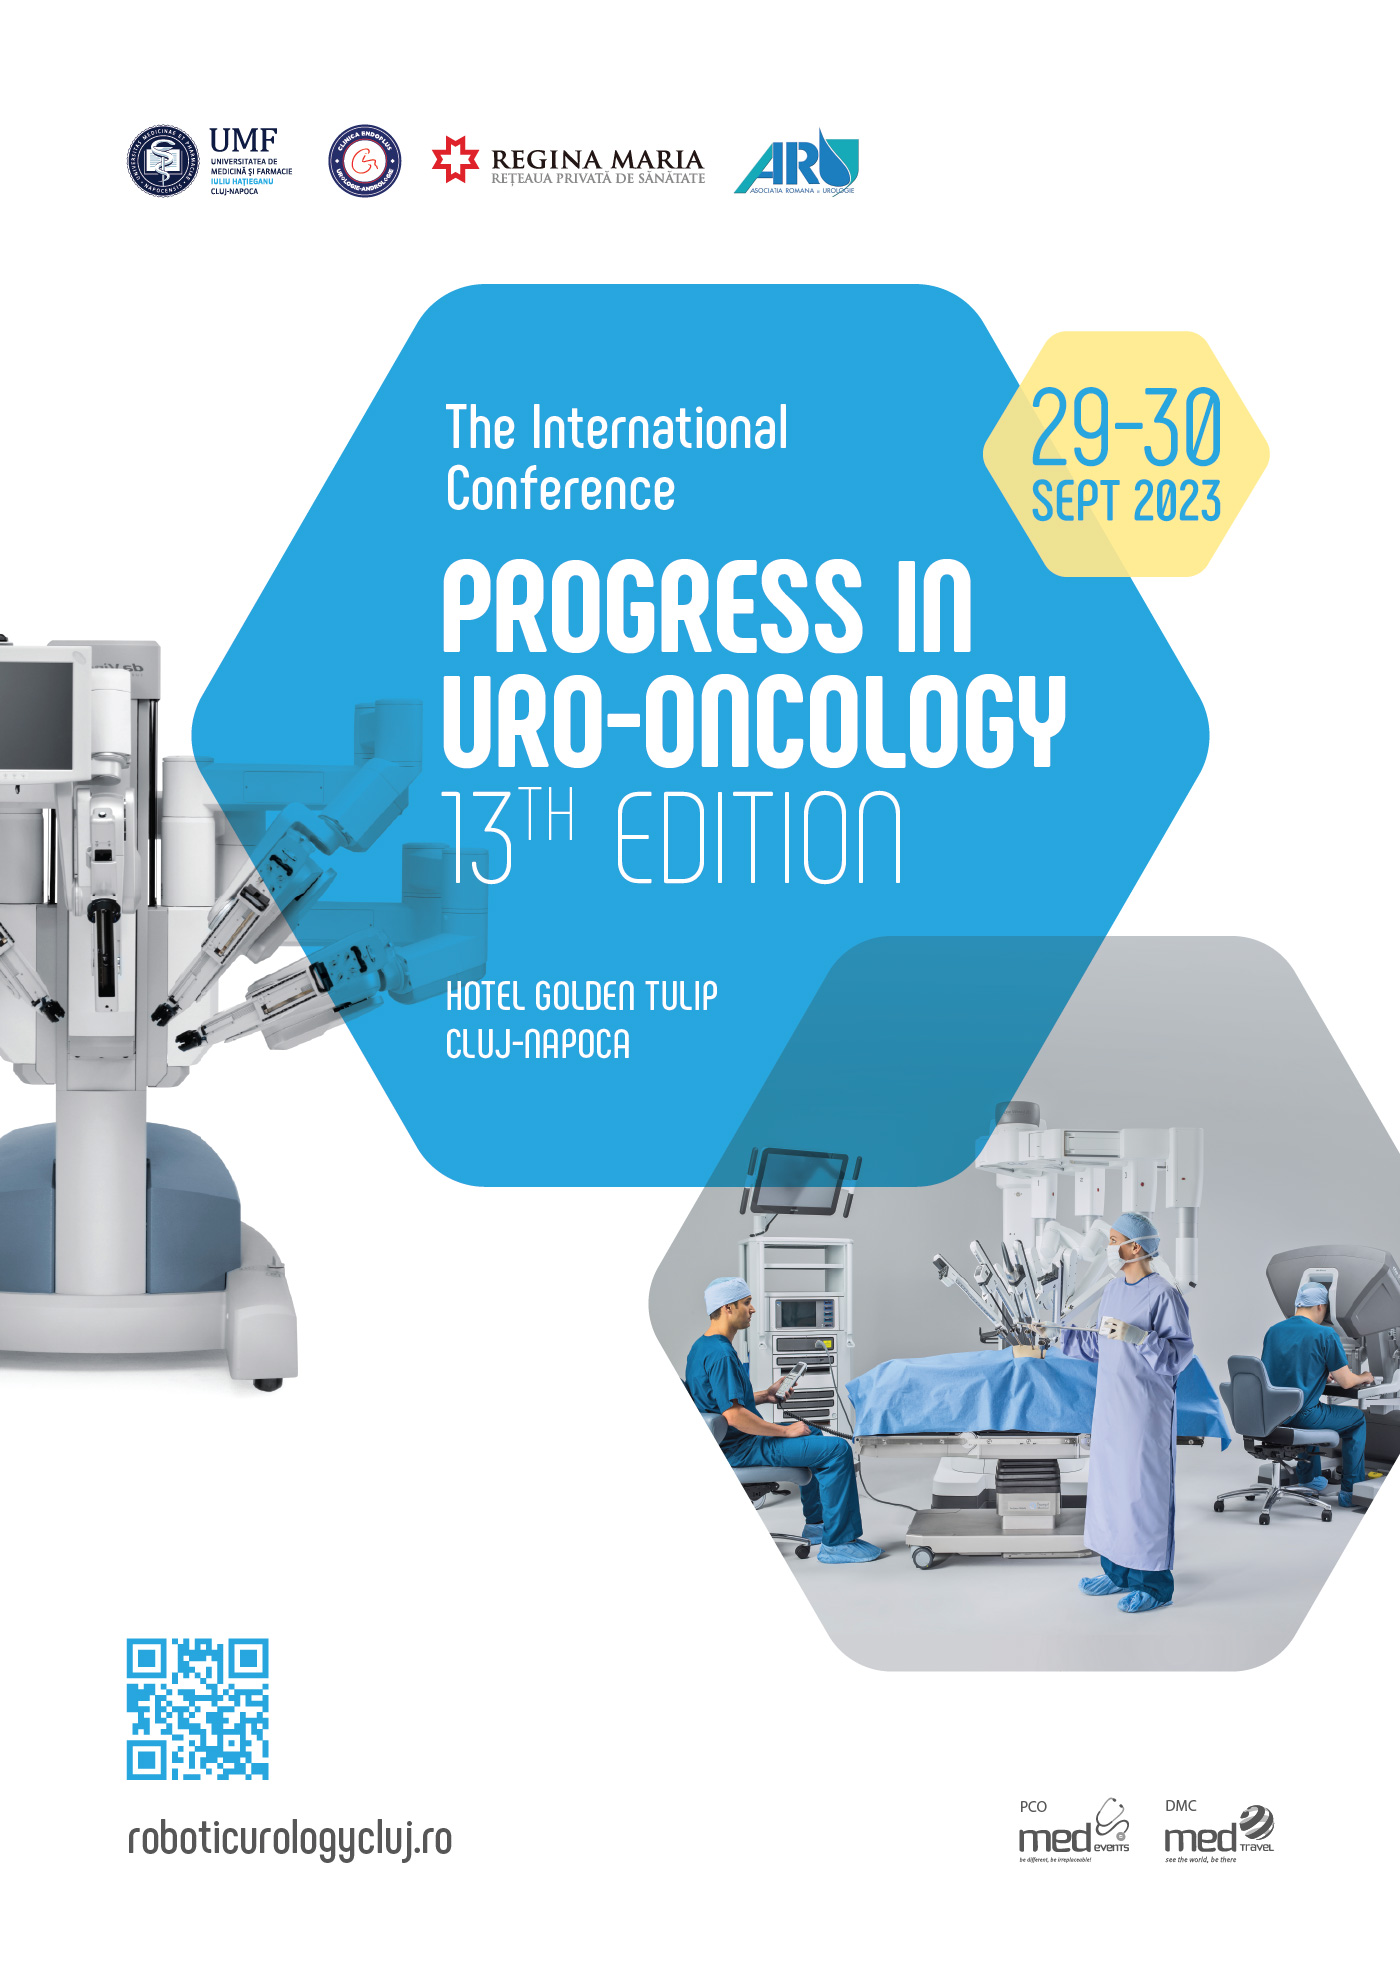 13th International Conference: Progress in Uro-Oncology